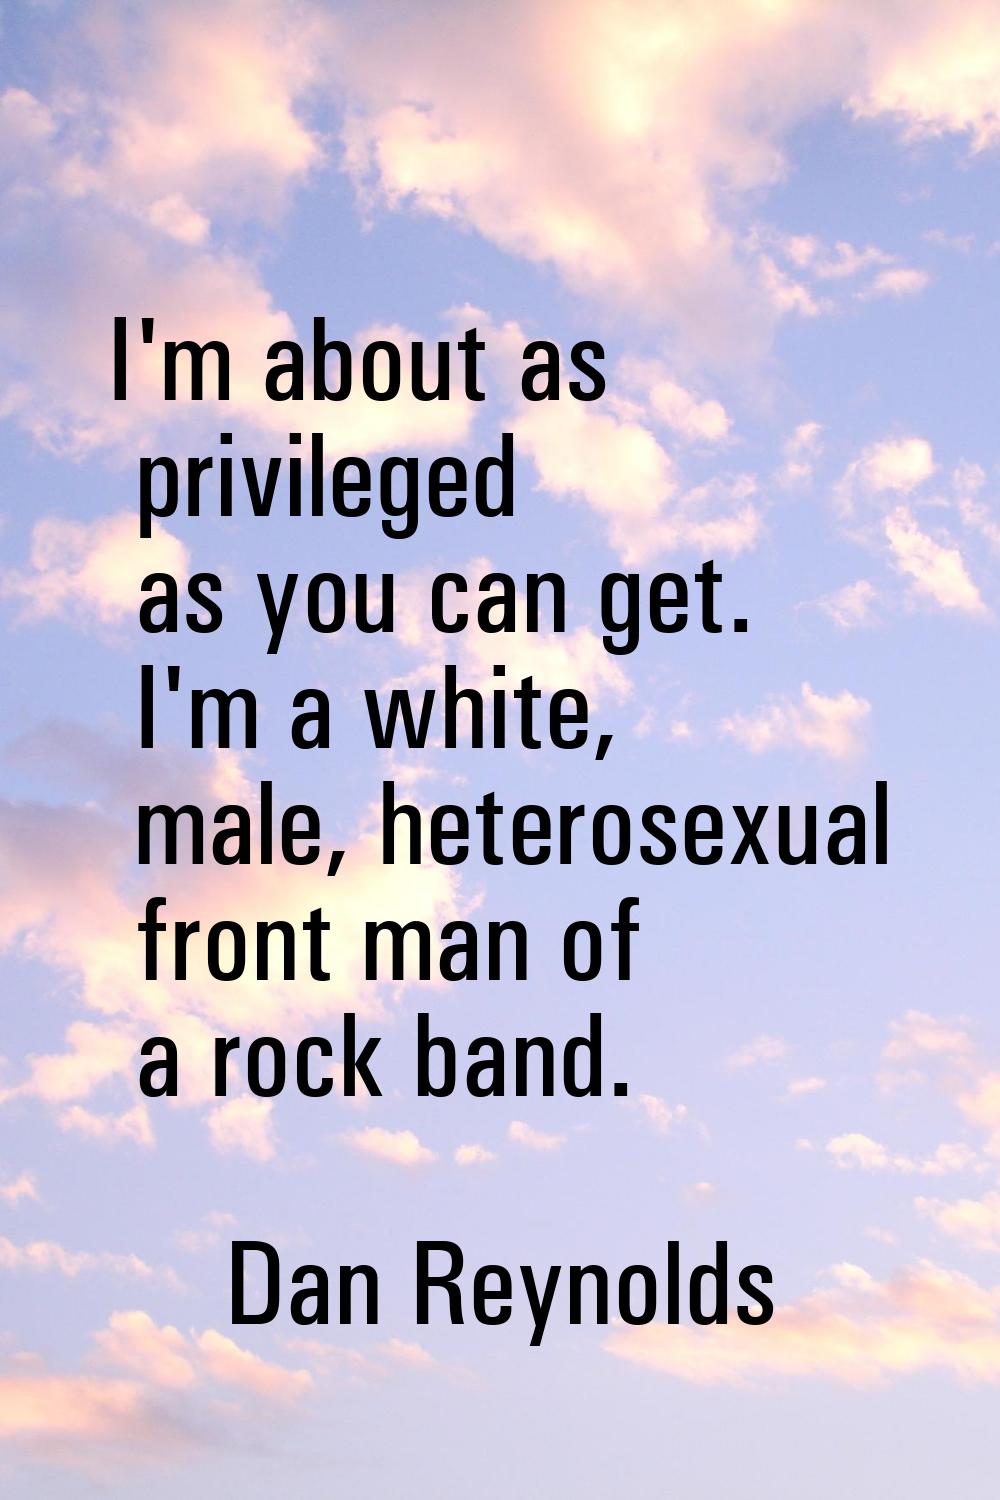 I'm about as privileged as you can get. I'm a white, male, heterosexual front man of a rock band.